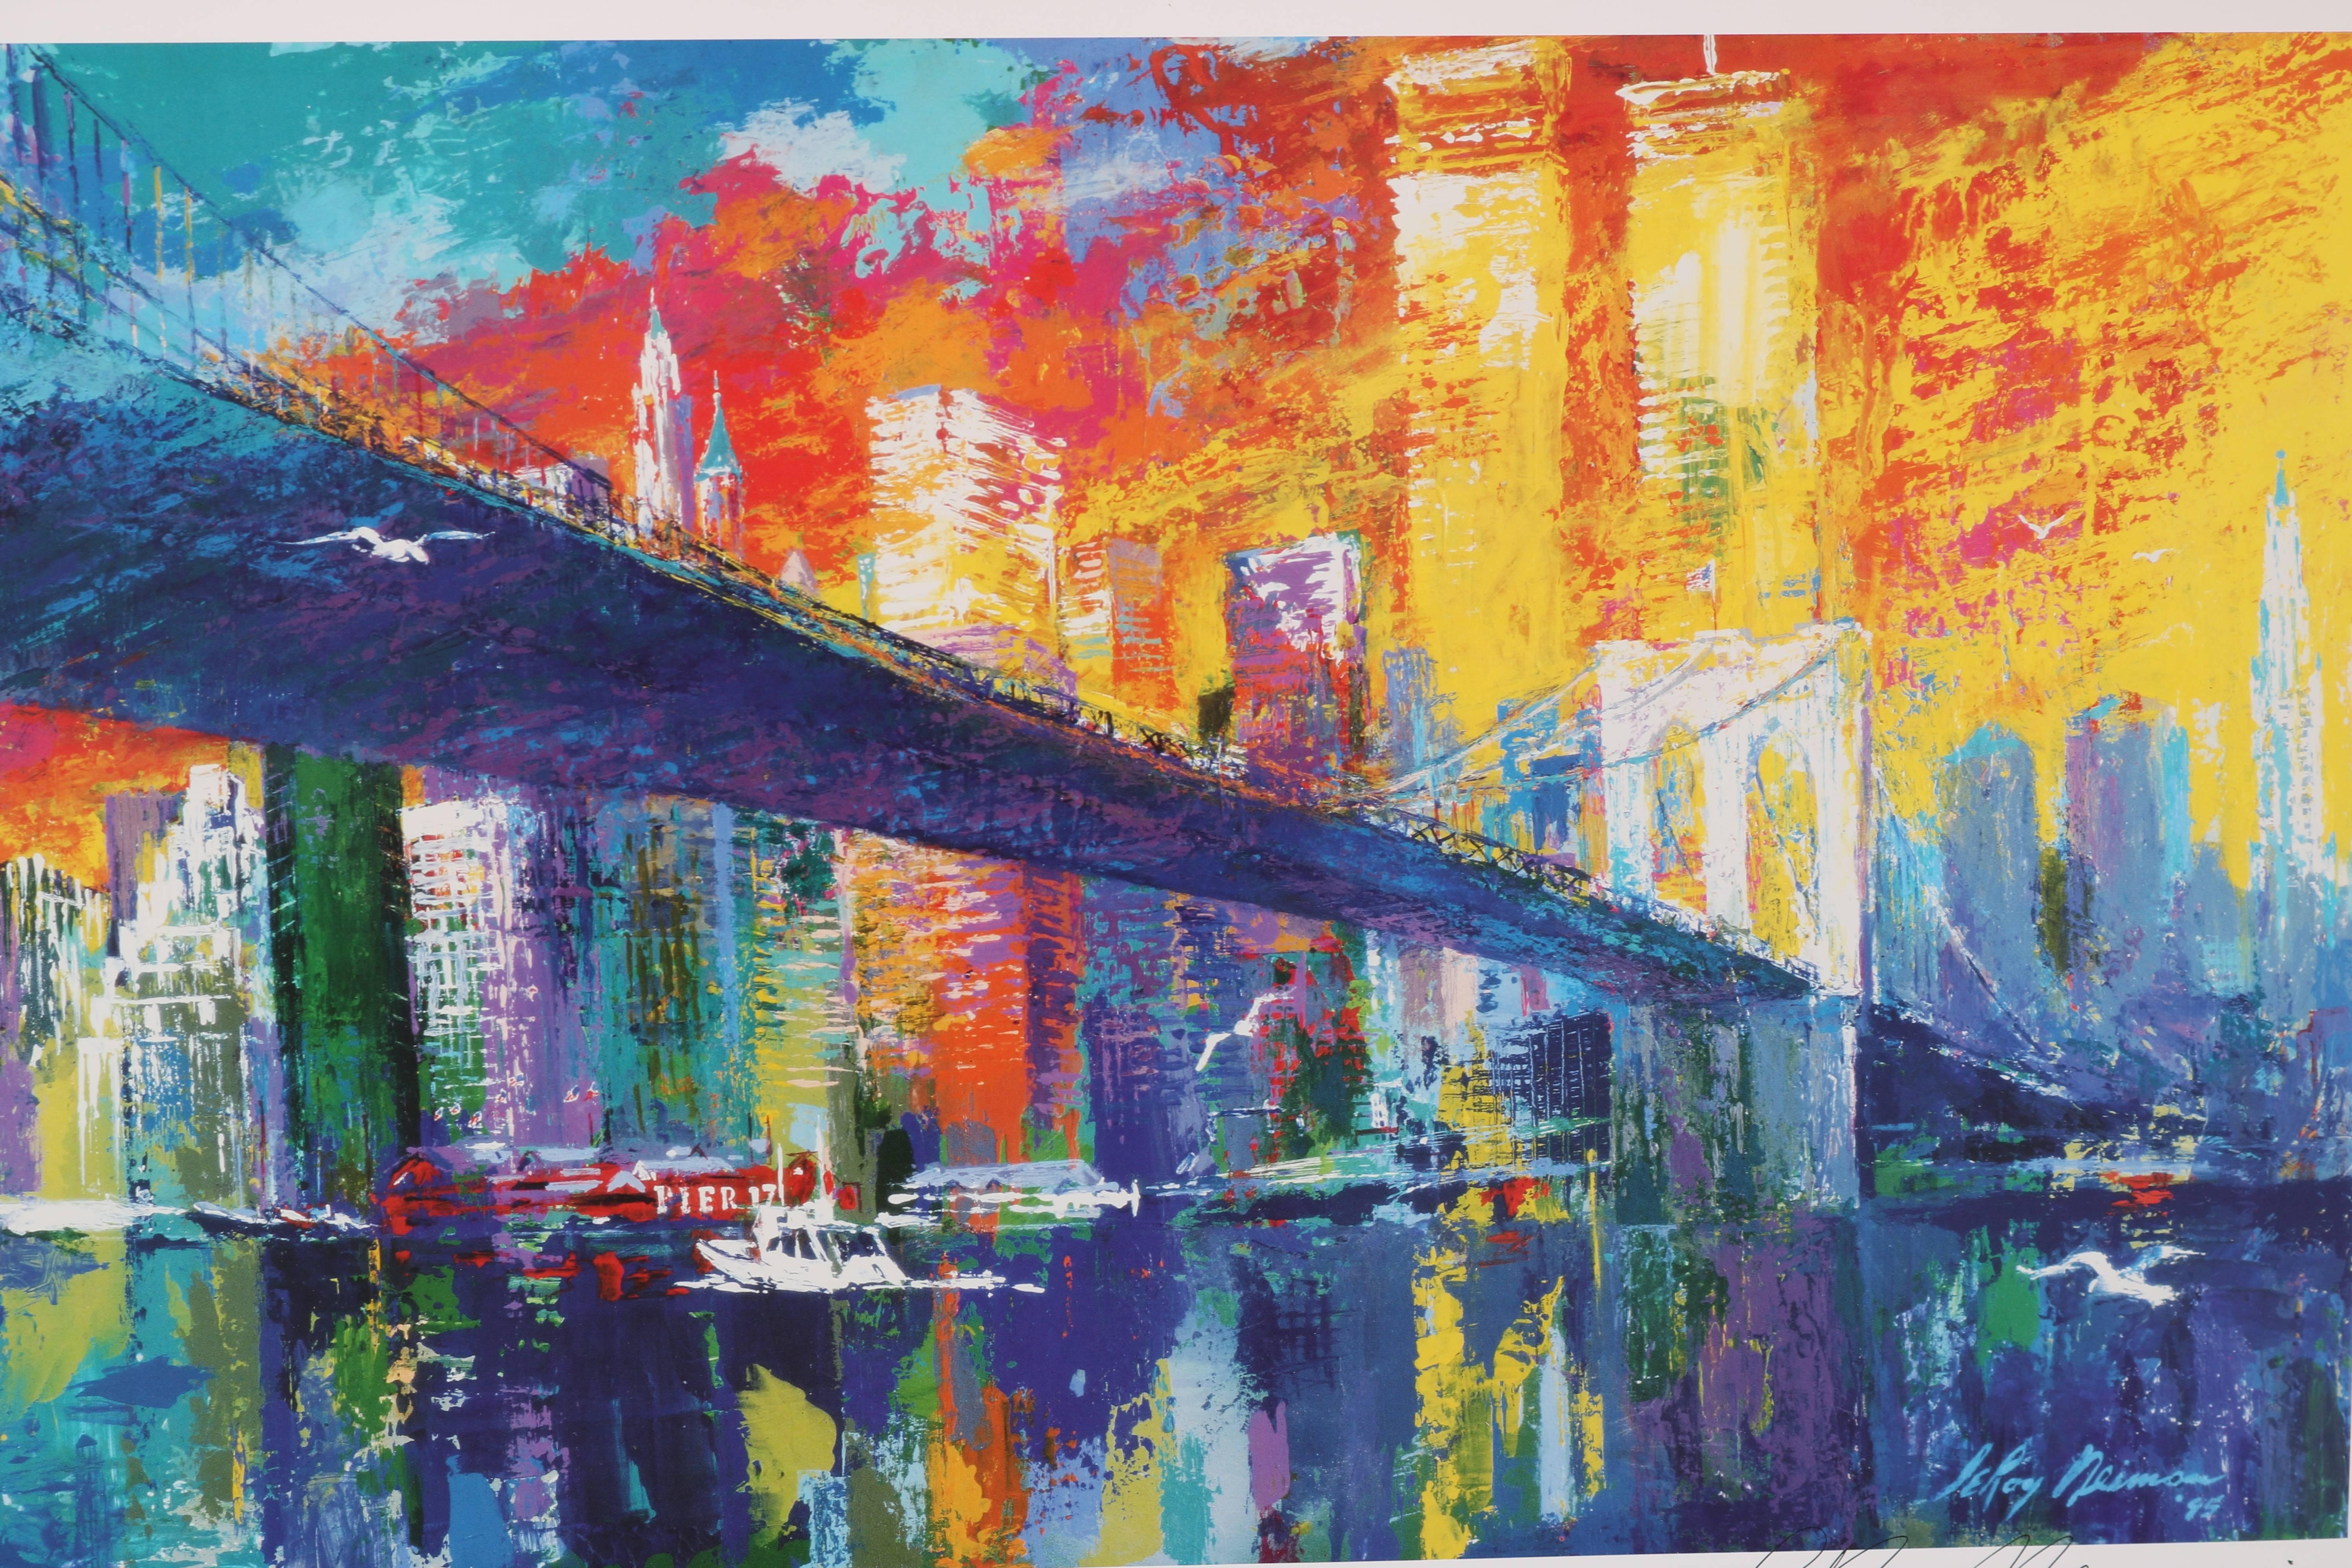 This signed lithograph by the American artist LeRoy Neiman captures the iconic Brooklyn bridge in a flurry of colors and emotion and it will make a statement in you home or office.

Note: Image 12